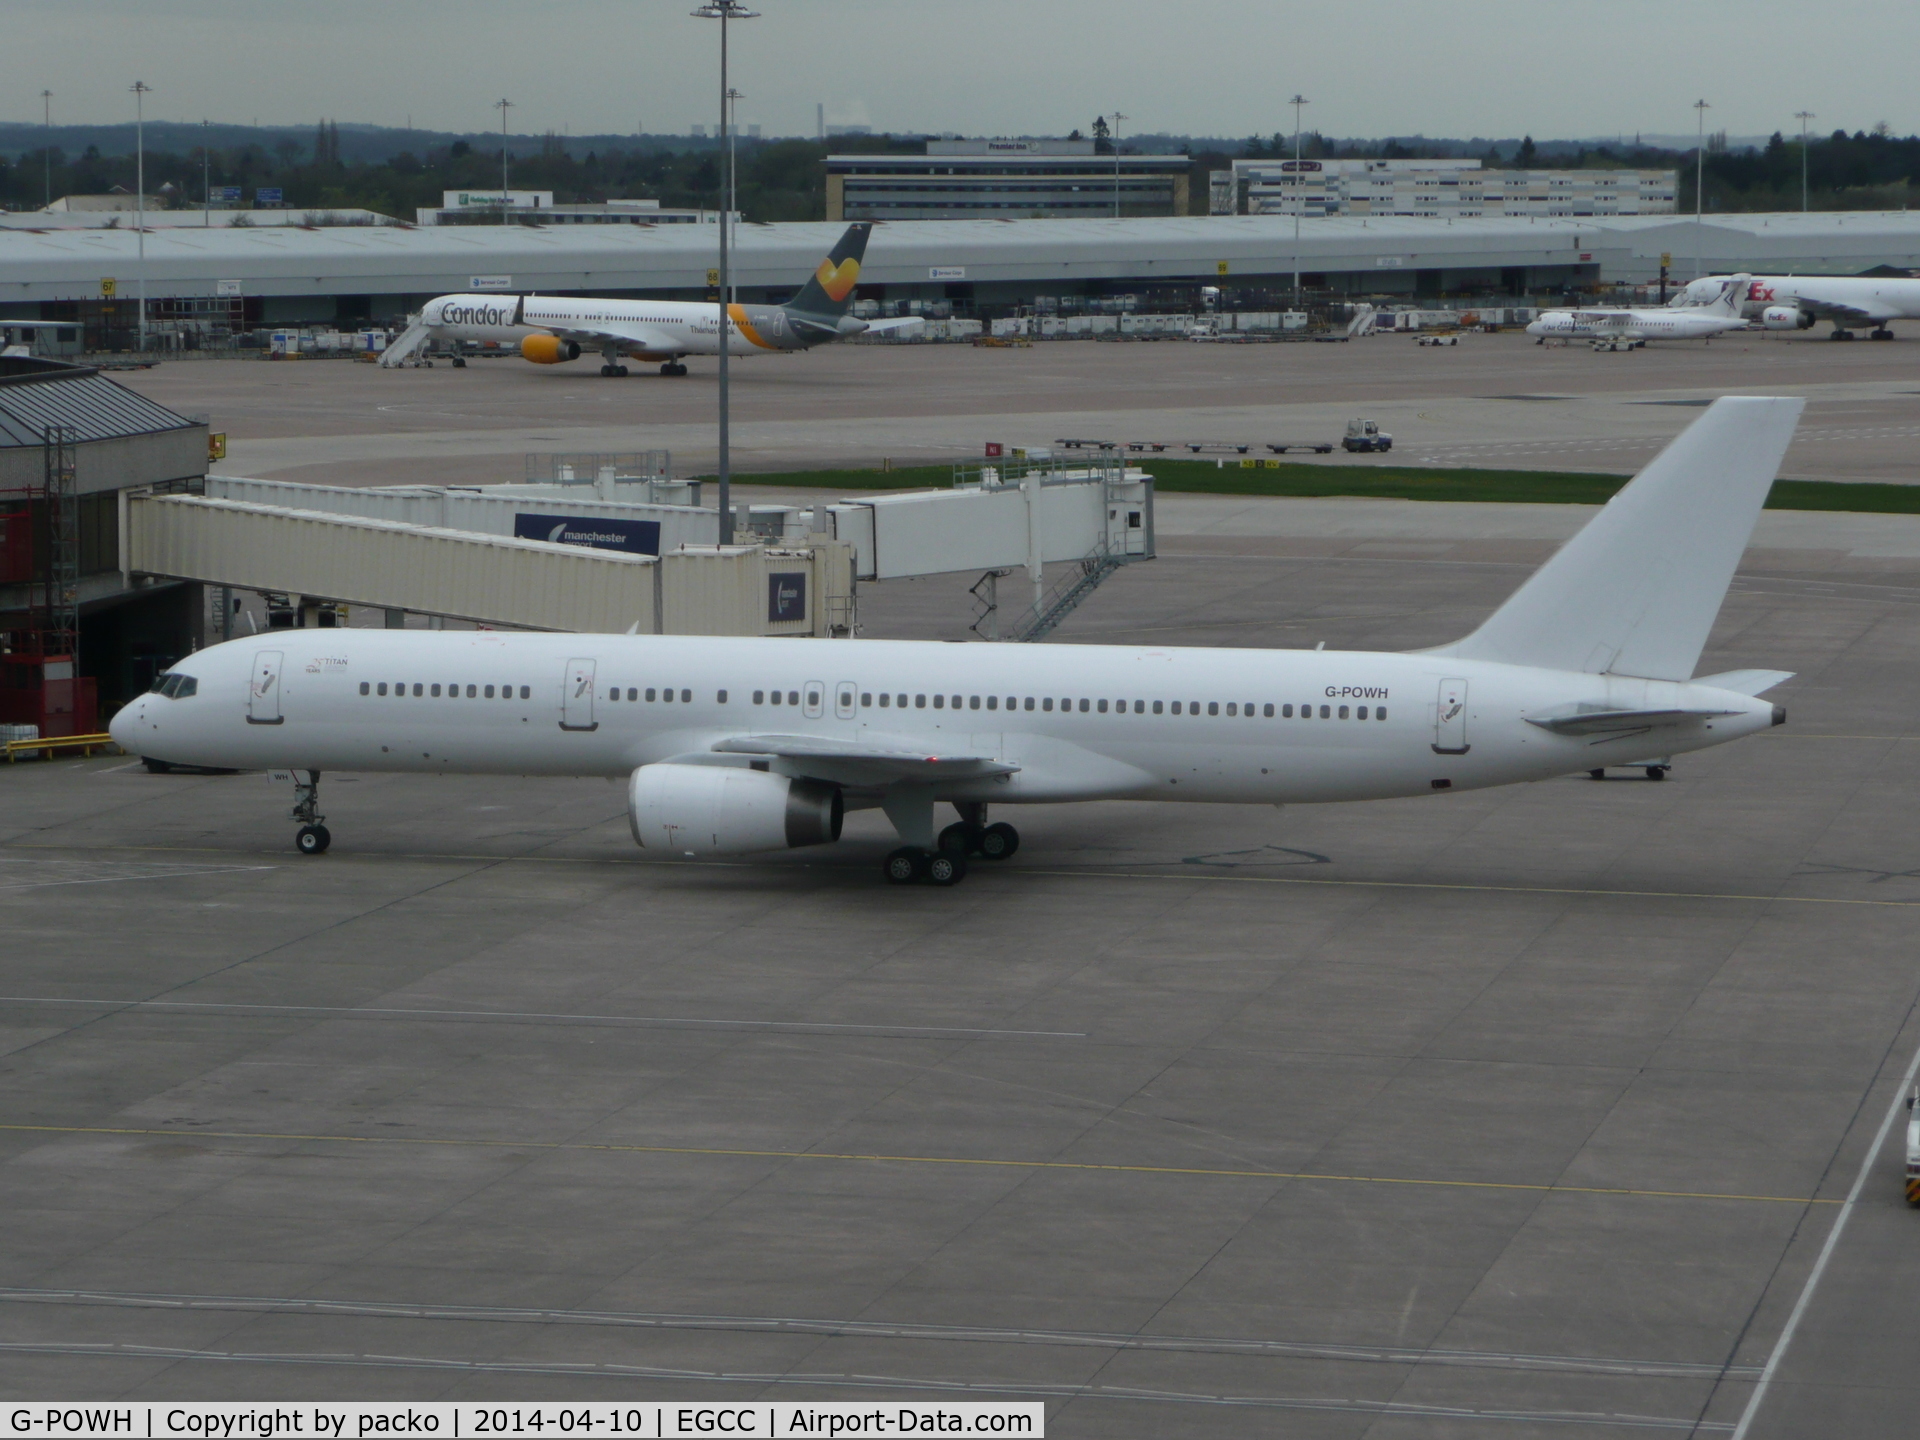 G-POWH, 2000 Boeing 757-256 C/N 29308, not all from its stand/gate
CFG aircraft in the back ground